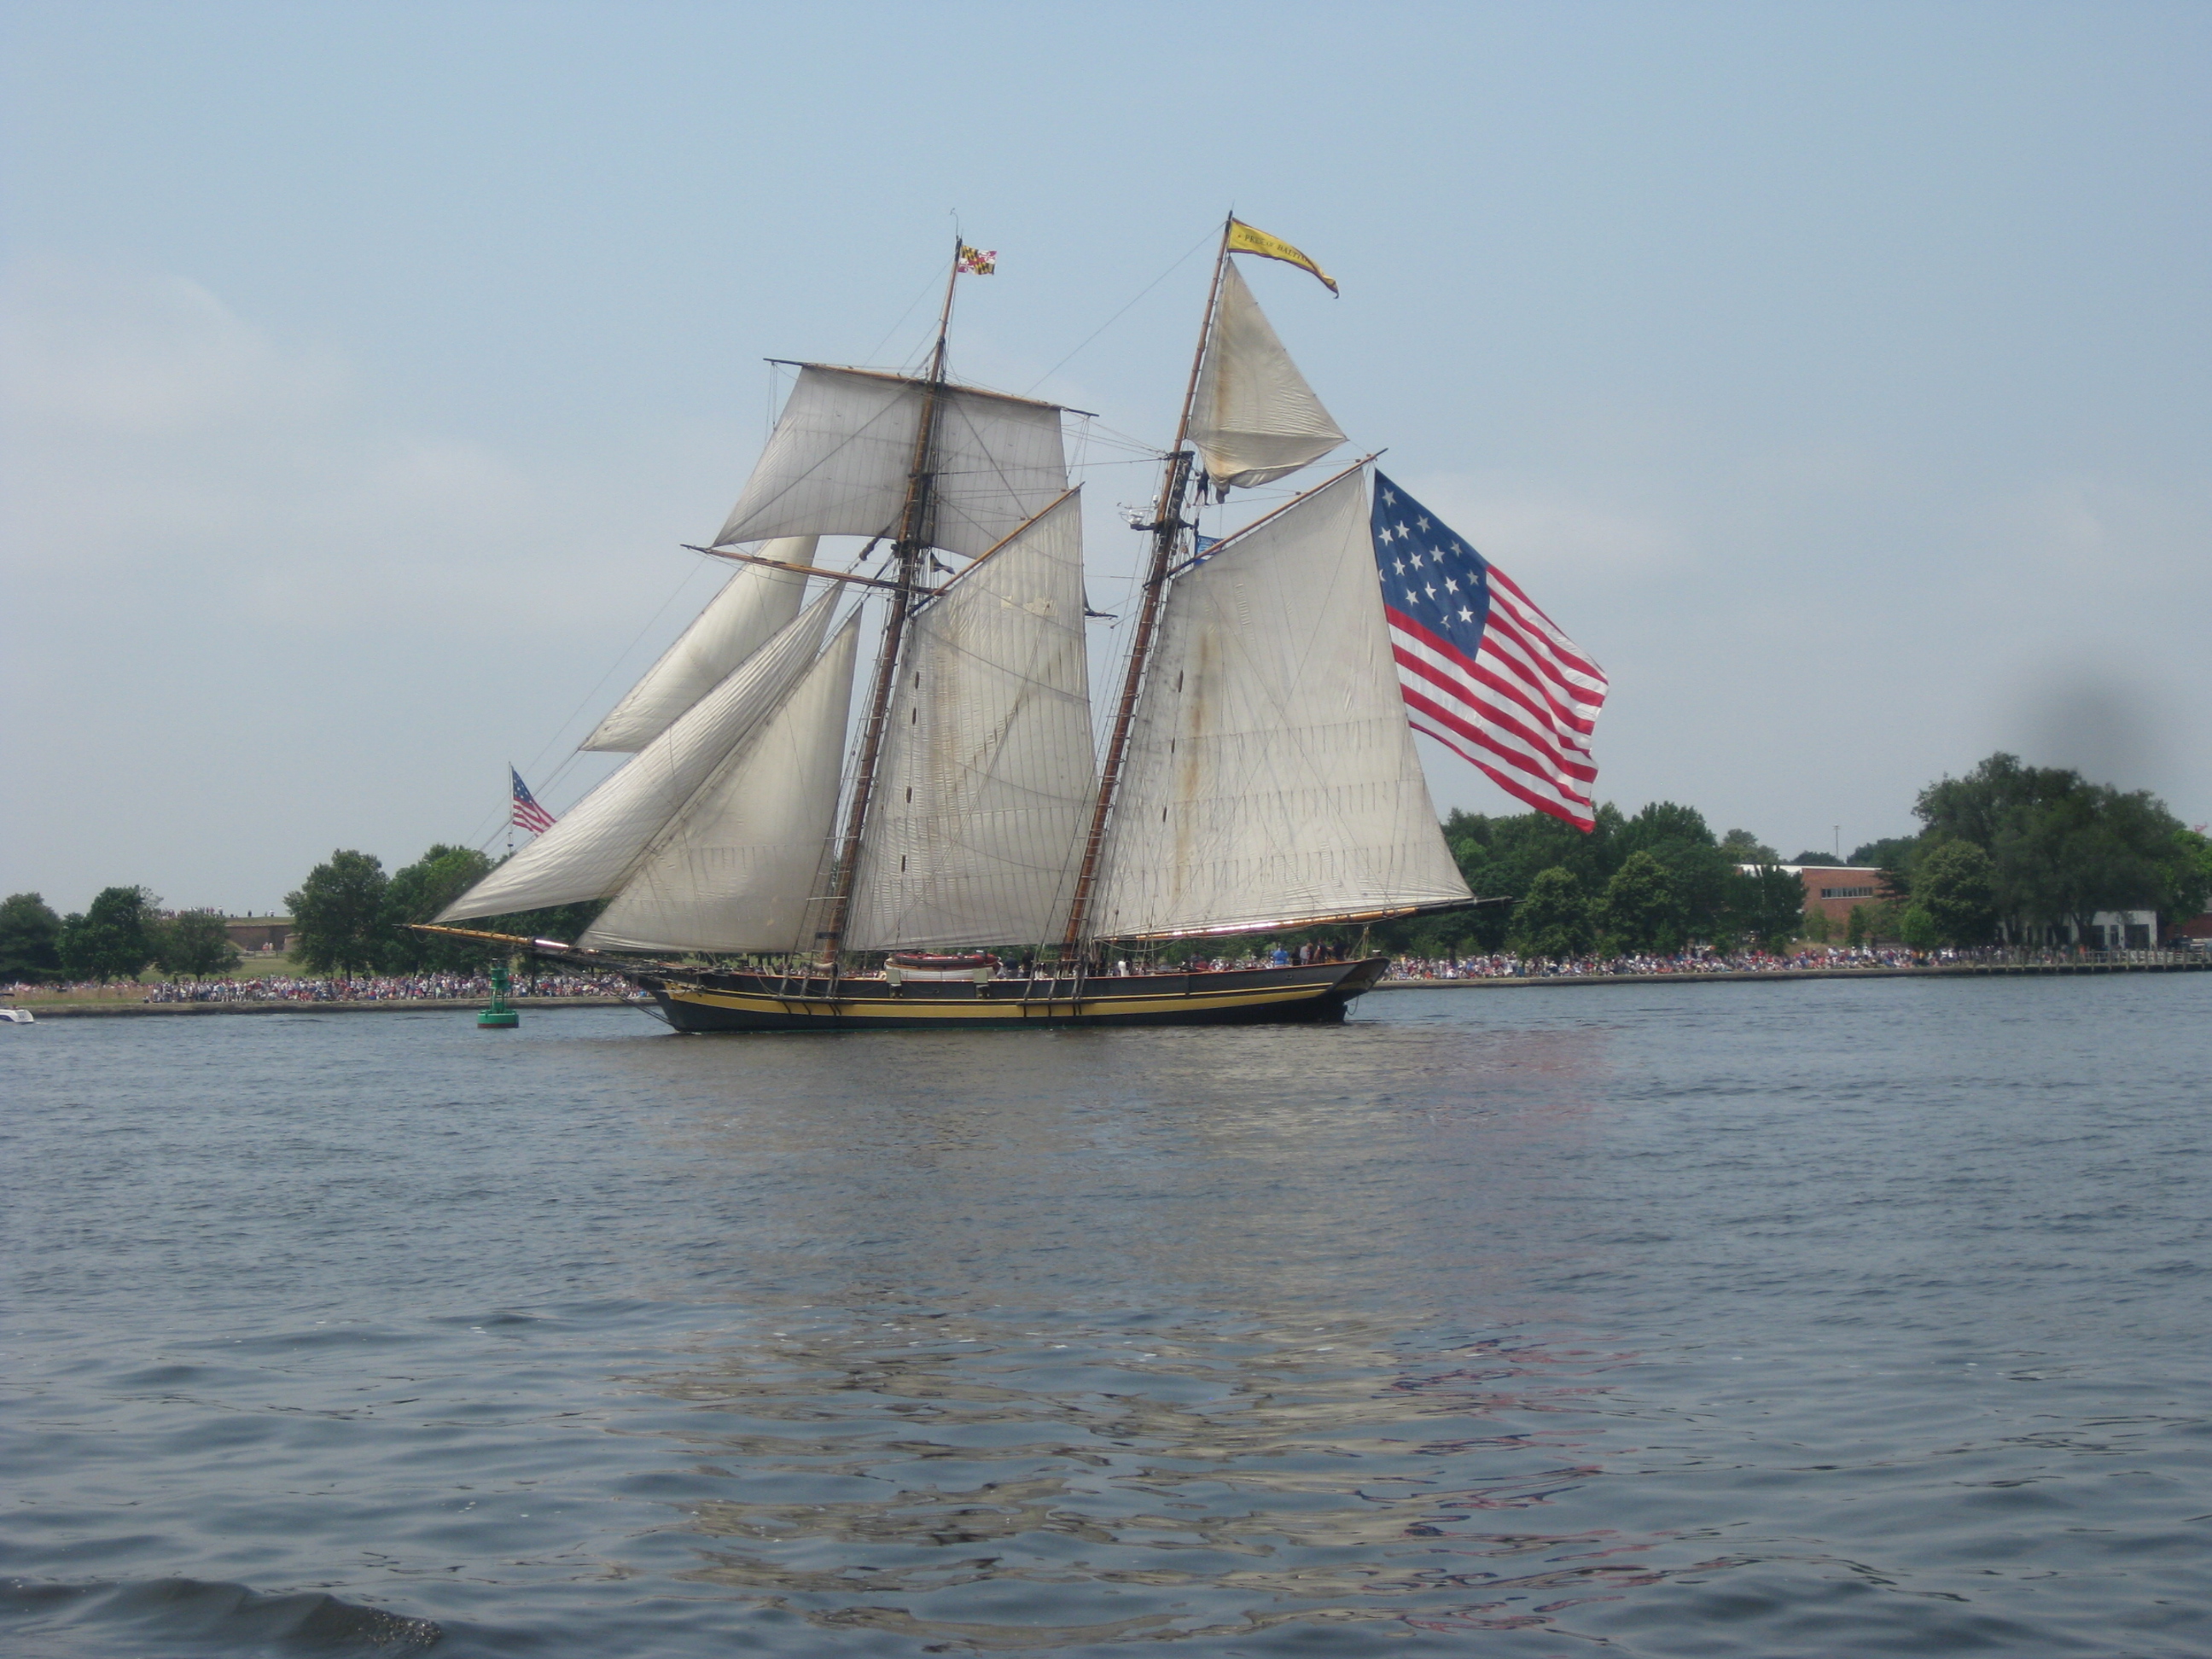 Pride of Baltimore II at Fort McHenry